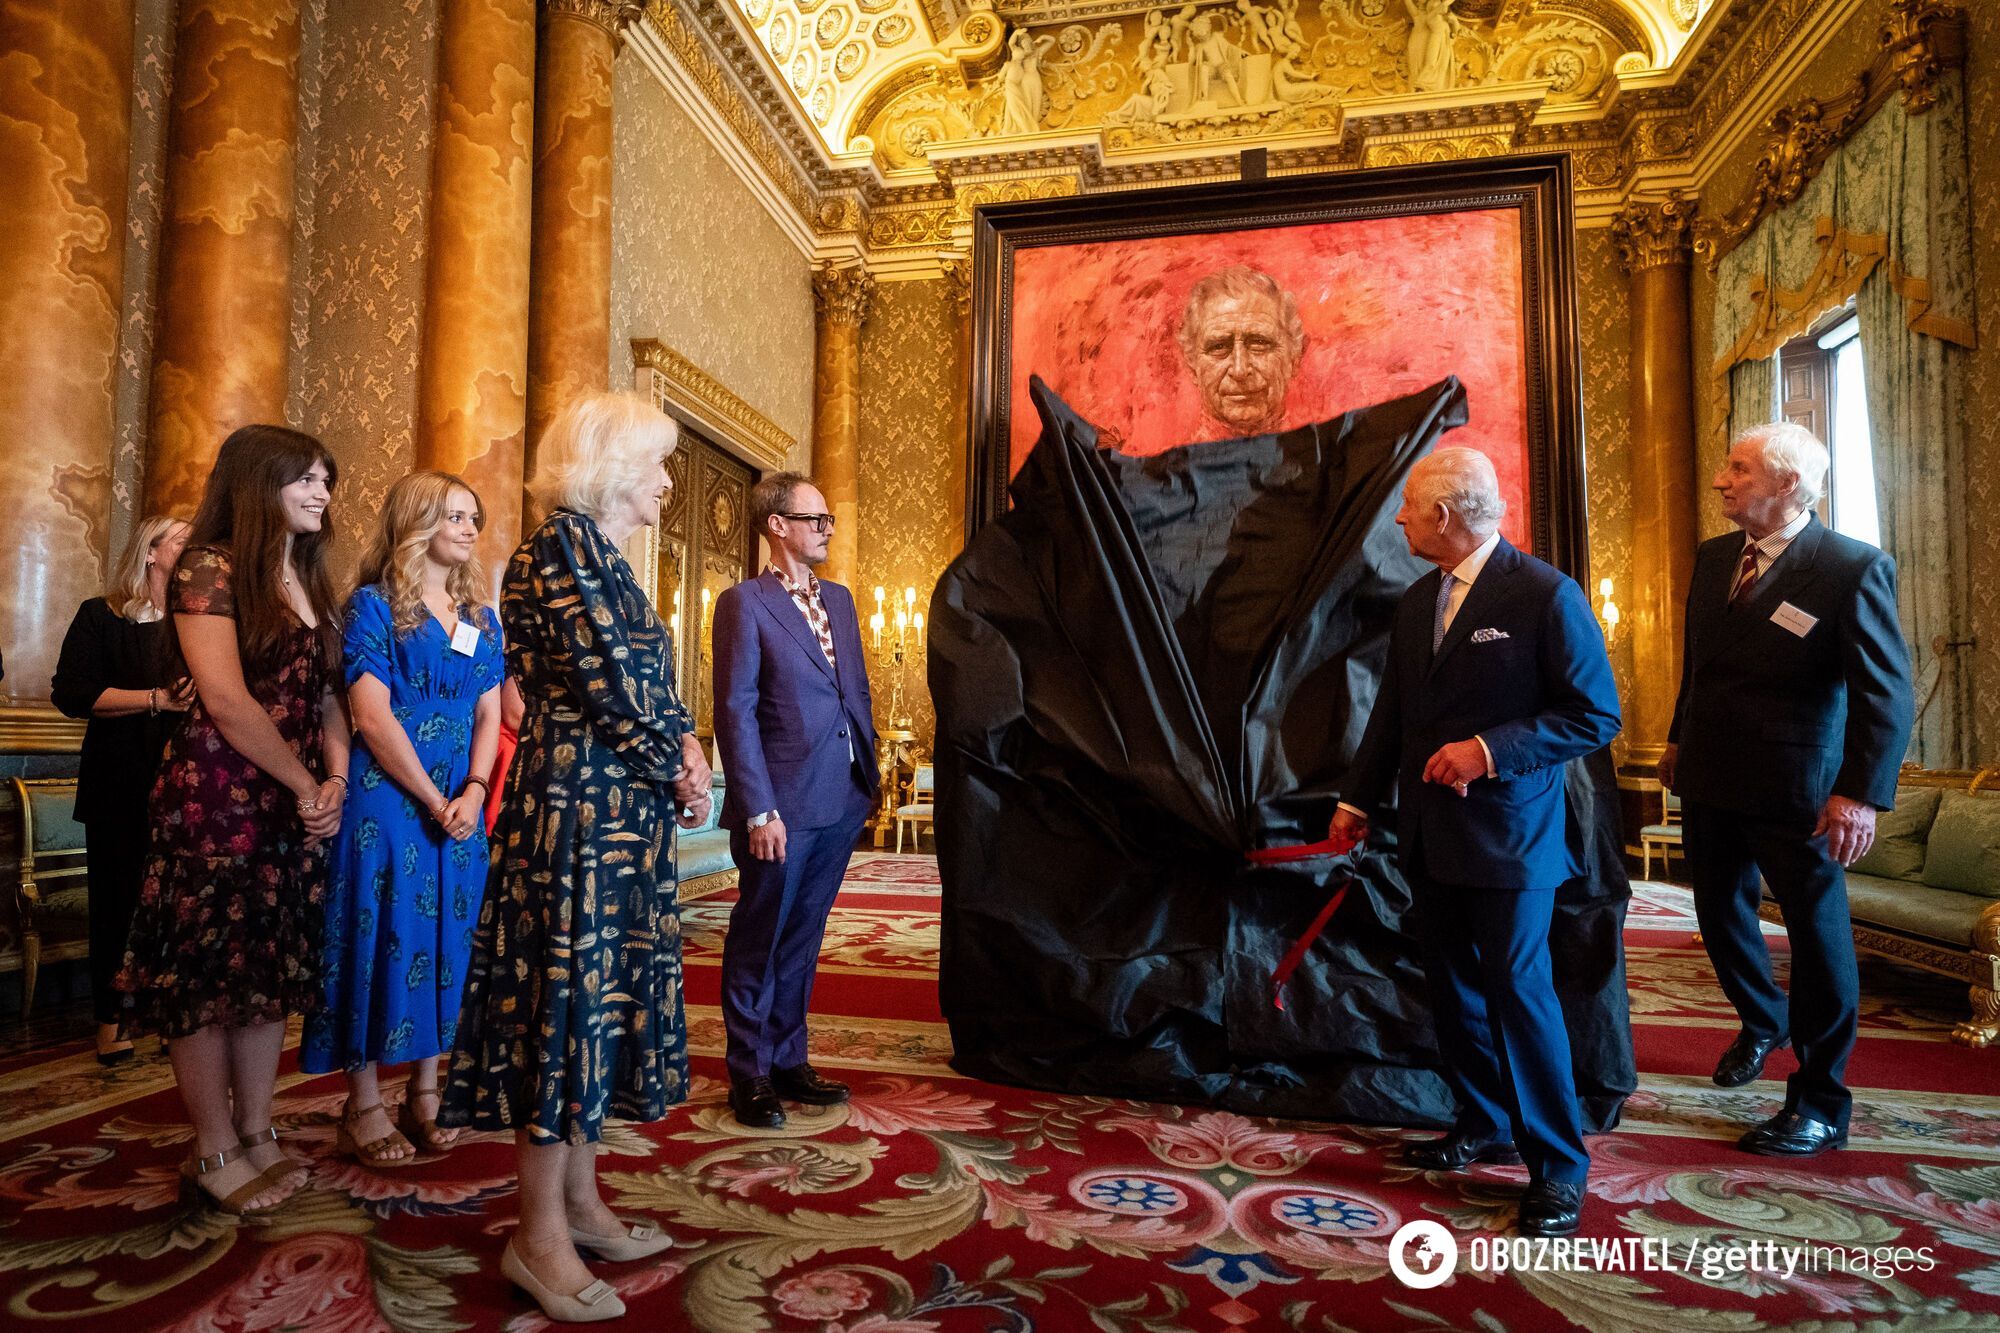 ''As if jam had been spilled'': the official portrait of King Charles sparked a discussion online. Photo